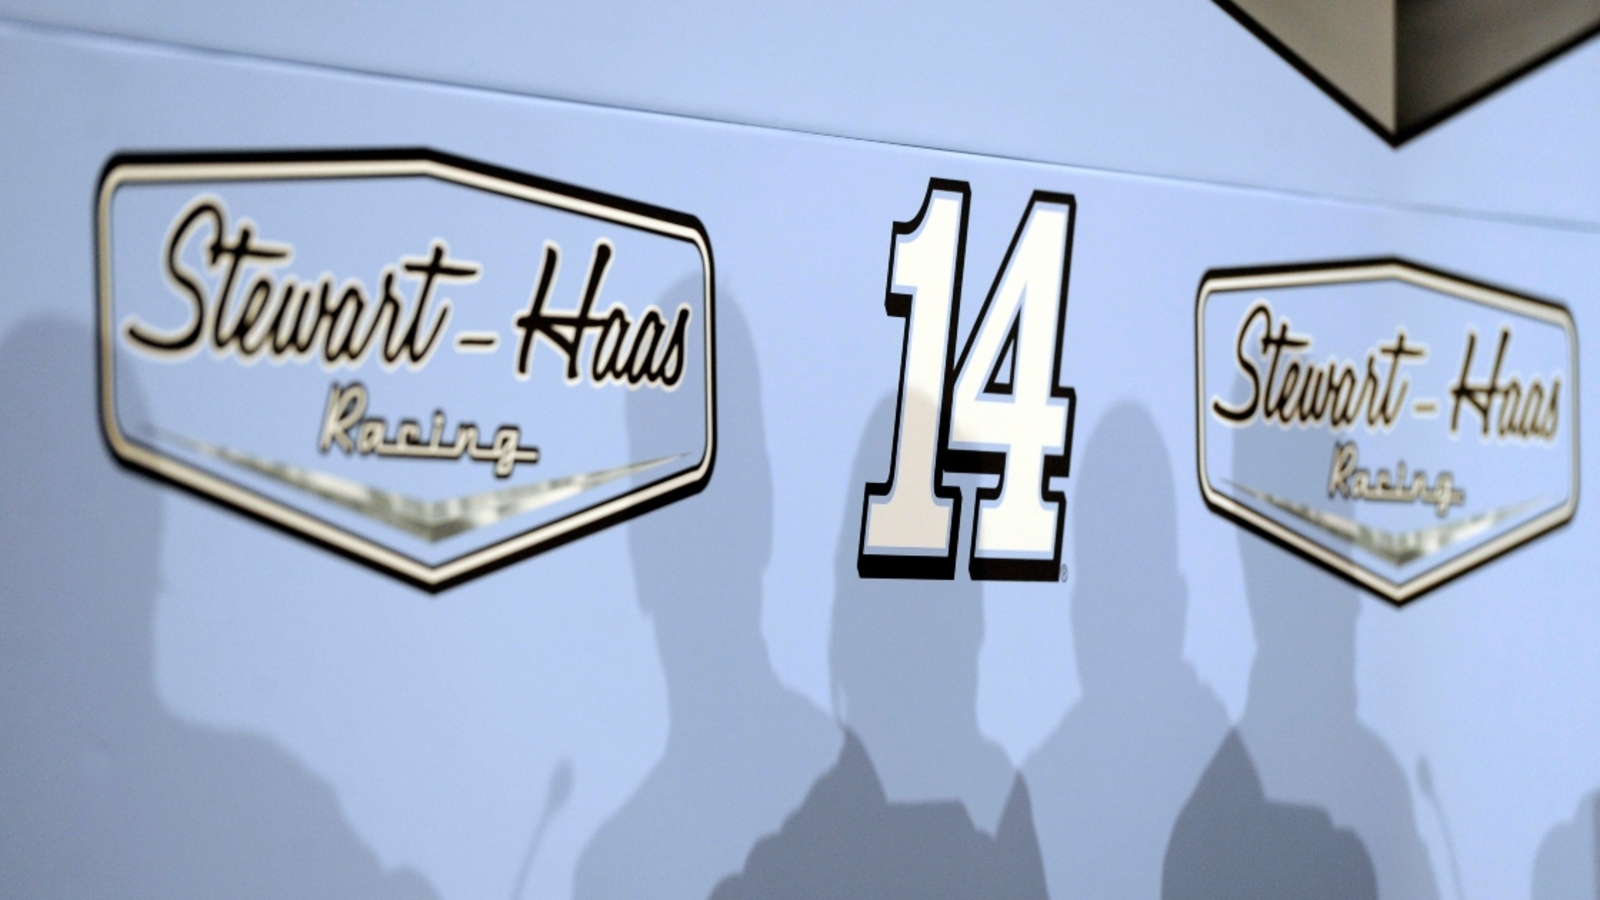 Kevin Harvick, Clint Bowyer react to Stewart-Haas Racing shutting down, legacy